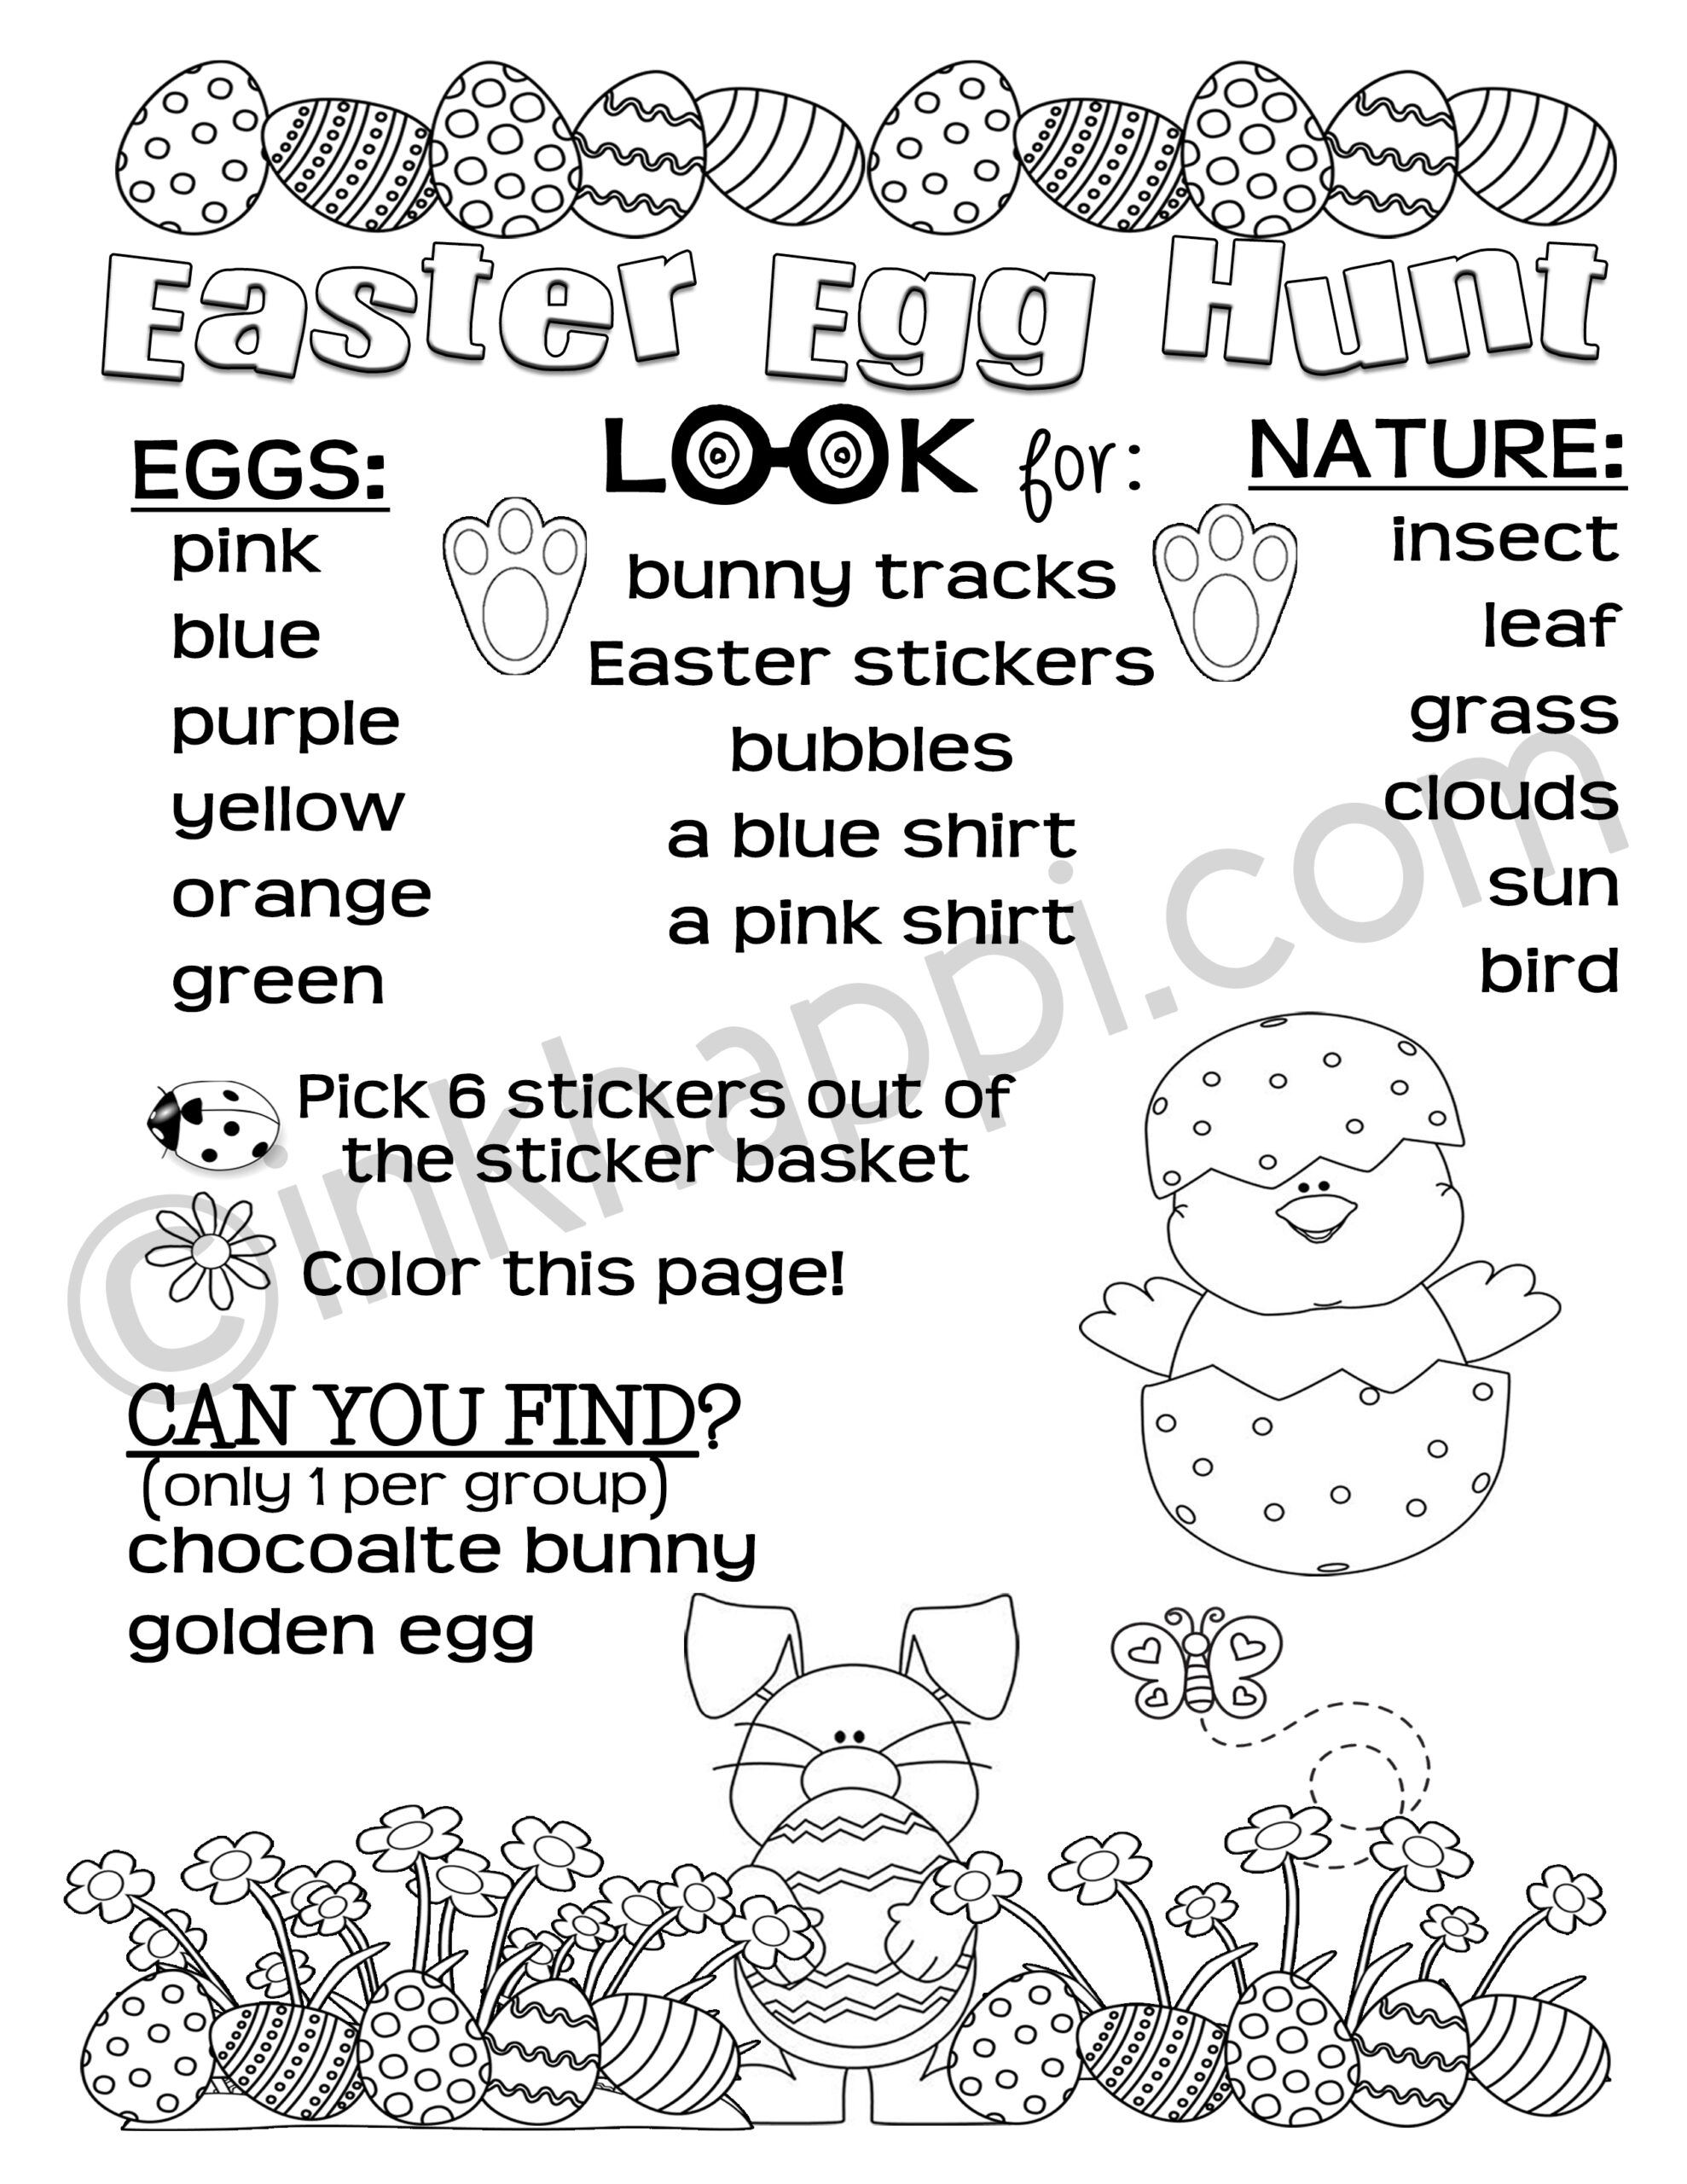 Easter egg hunt all planned out for you plus free printables